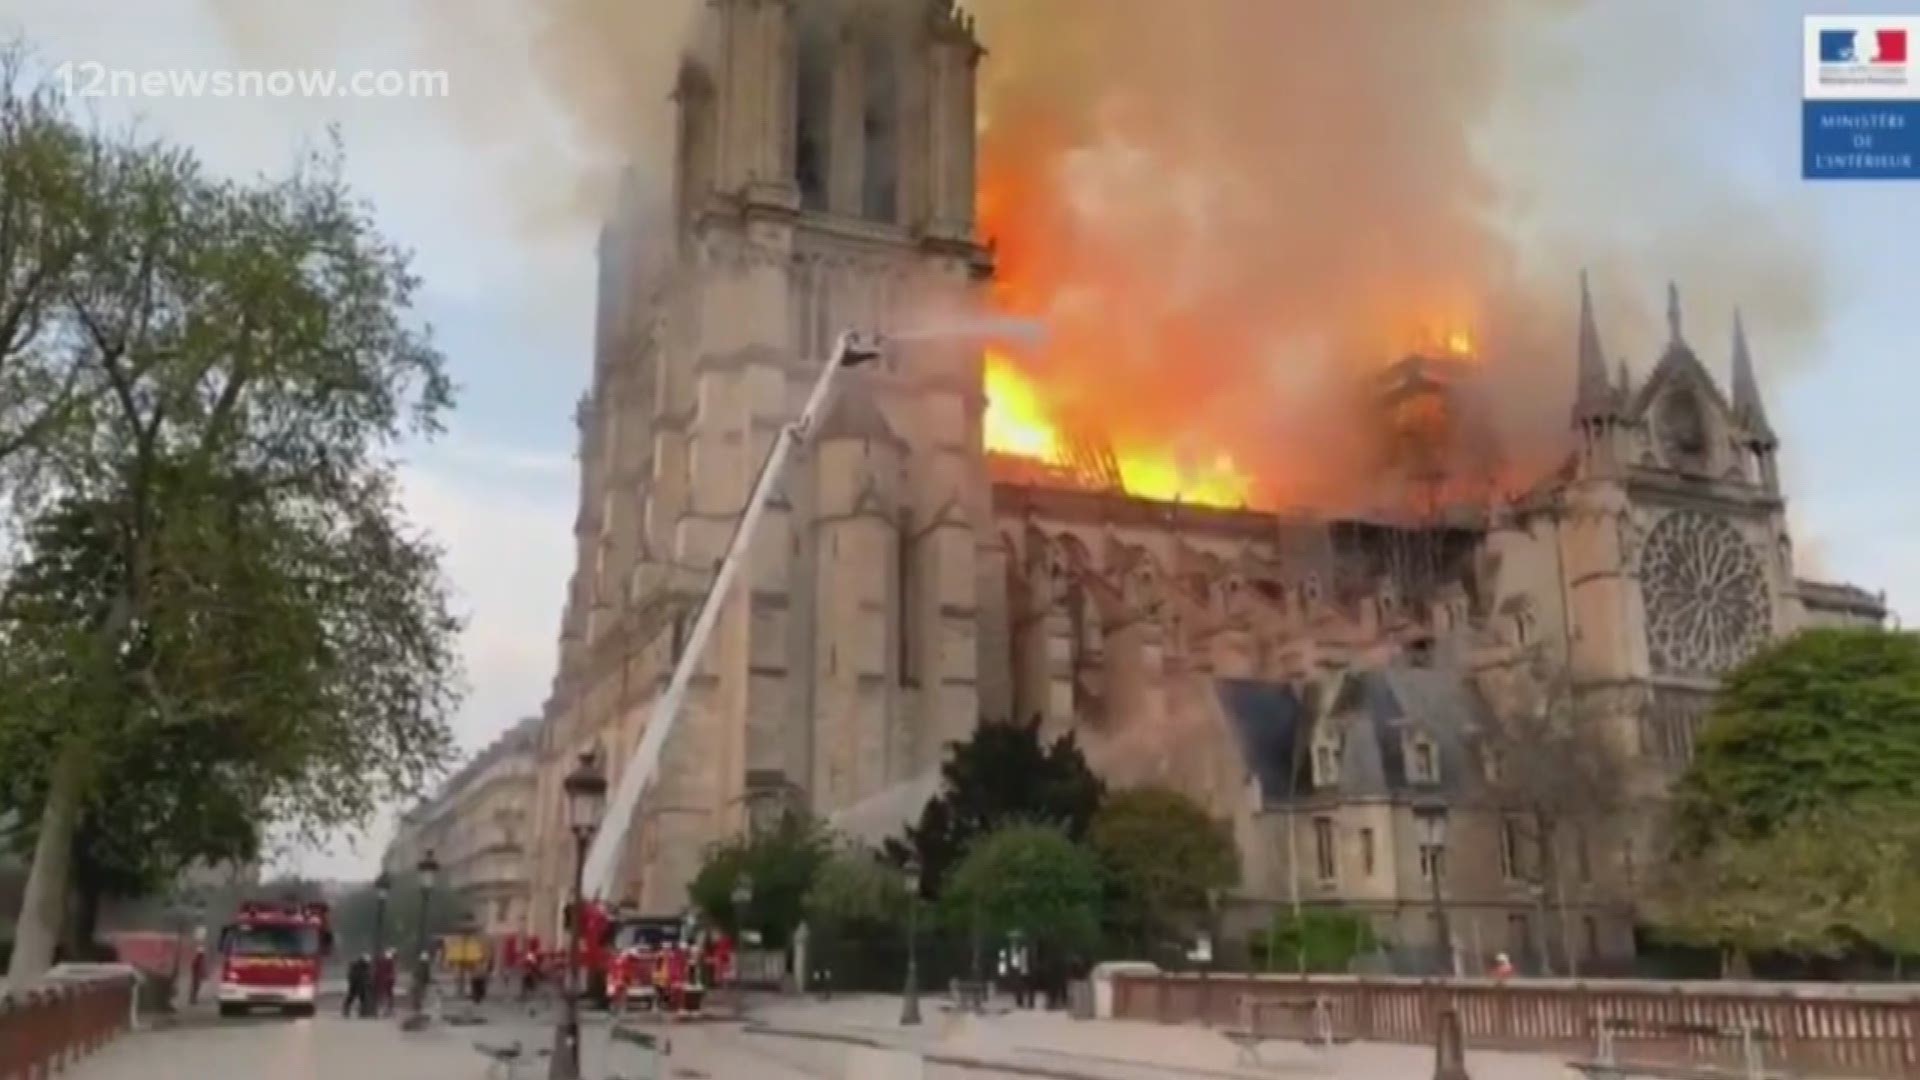 Due to safety concerns, work on the inside of the cathedral has not been permitted. The investigators are pointing to a possible short-circuit as the cause of the fire that. More than one billion dollars has been pledges for the restoration of the monument.